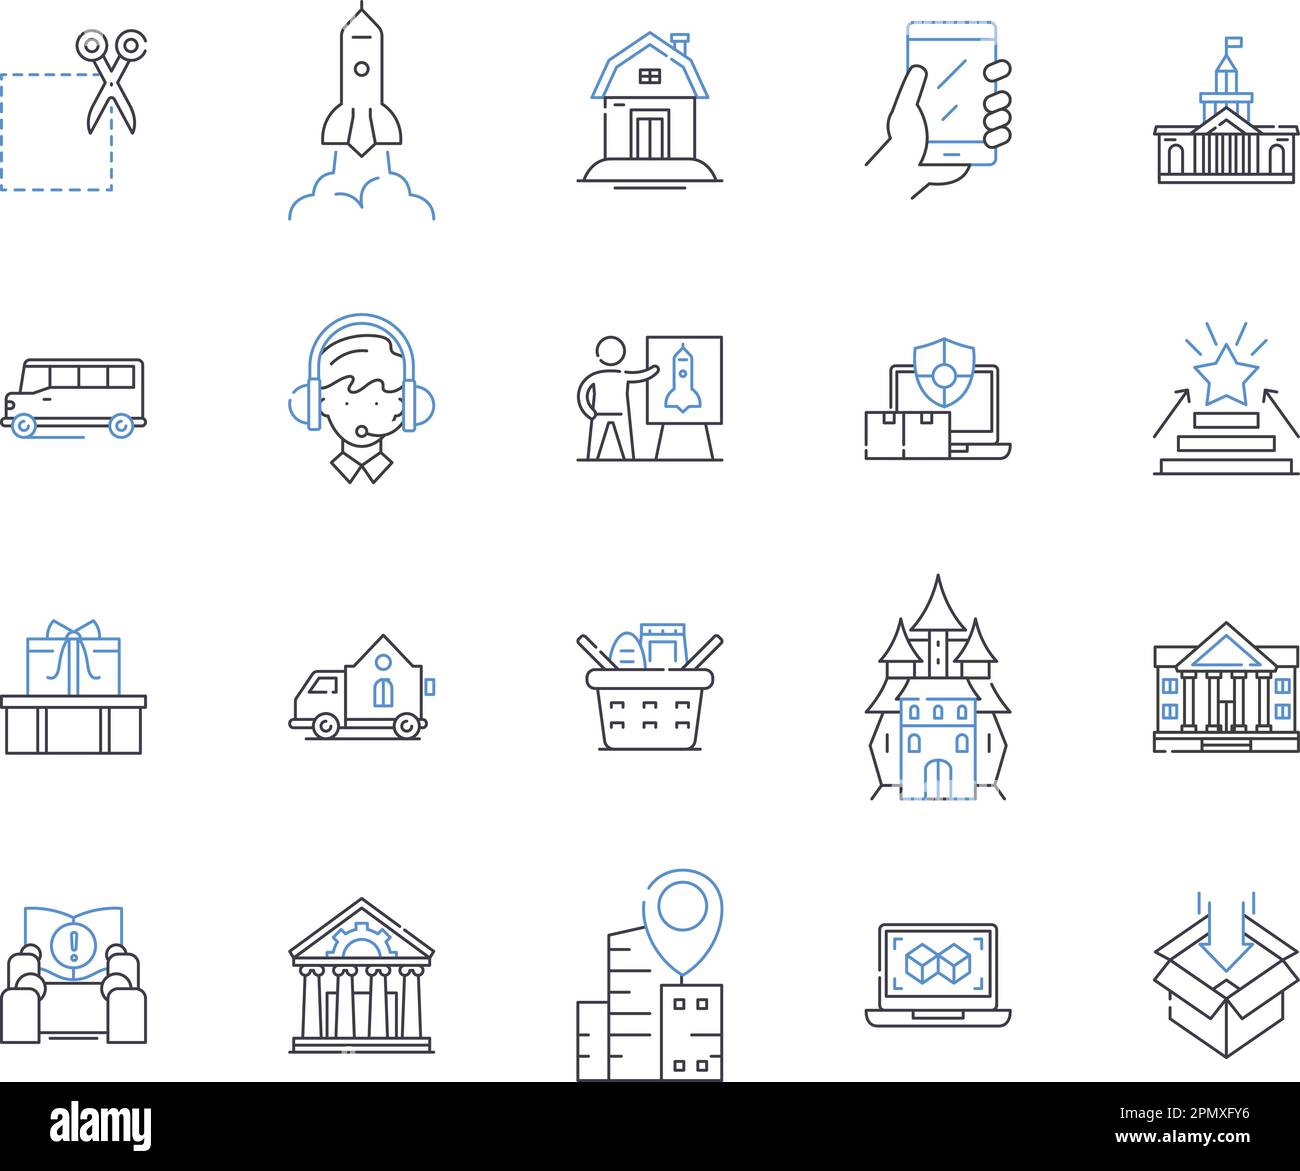 Public transportation outline icons collection. Bus, Train, Metro, Subway, Tram, Ferry, Monorail vector and illustration concept set. Cablecar, Taxi Stock Vector